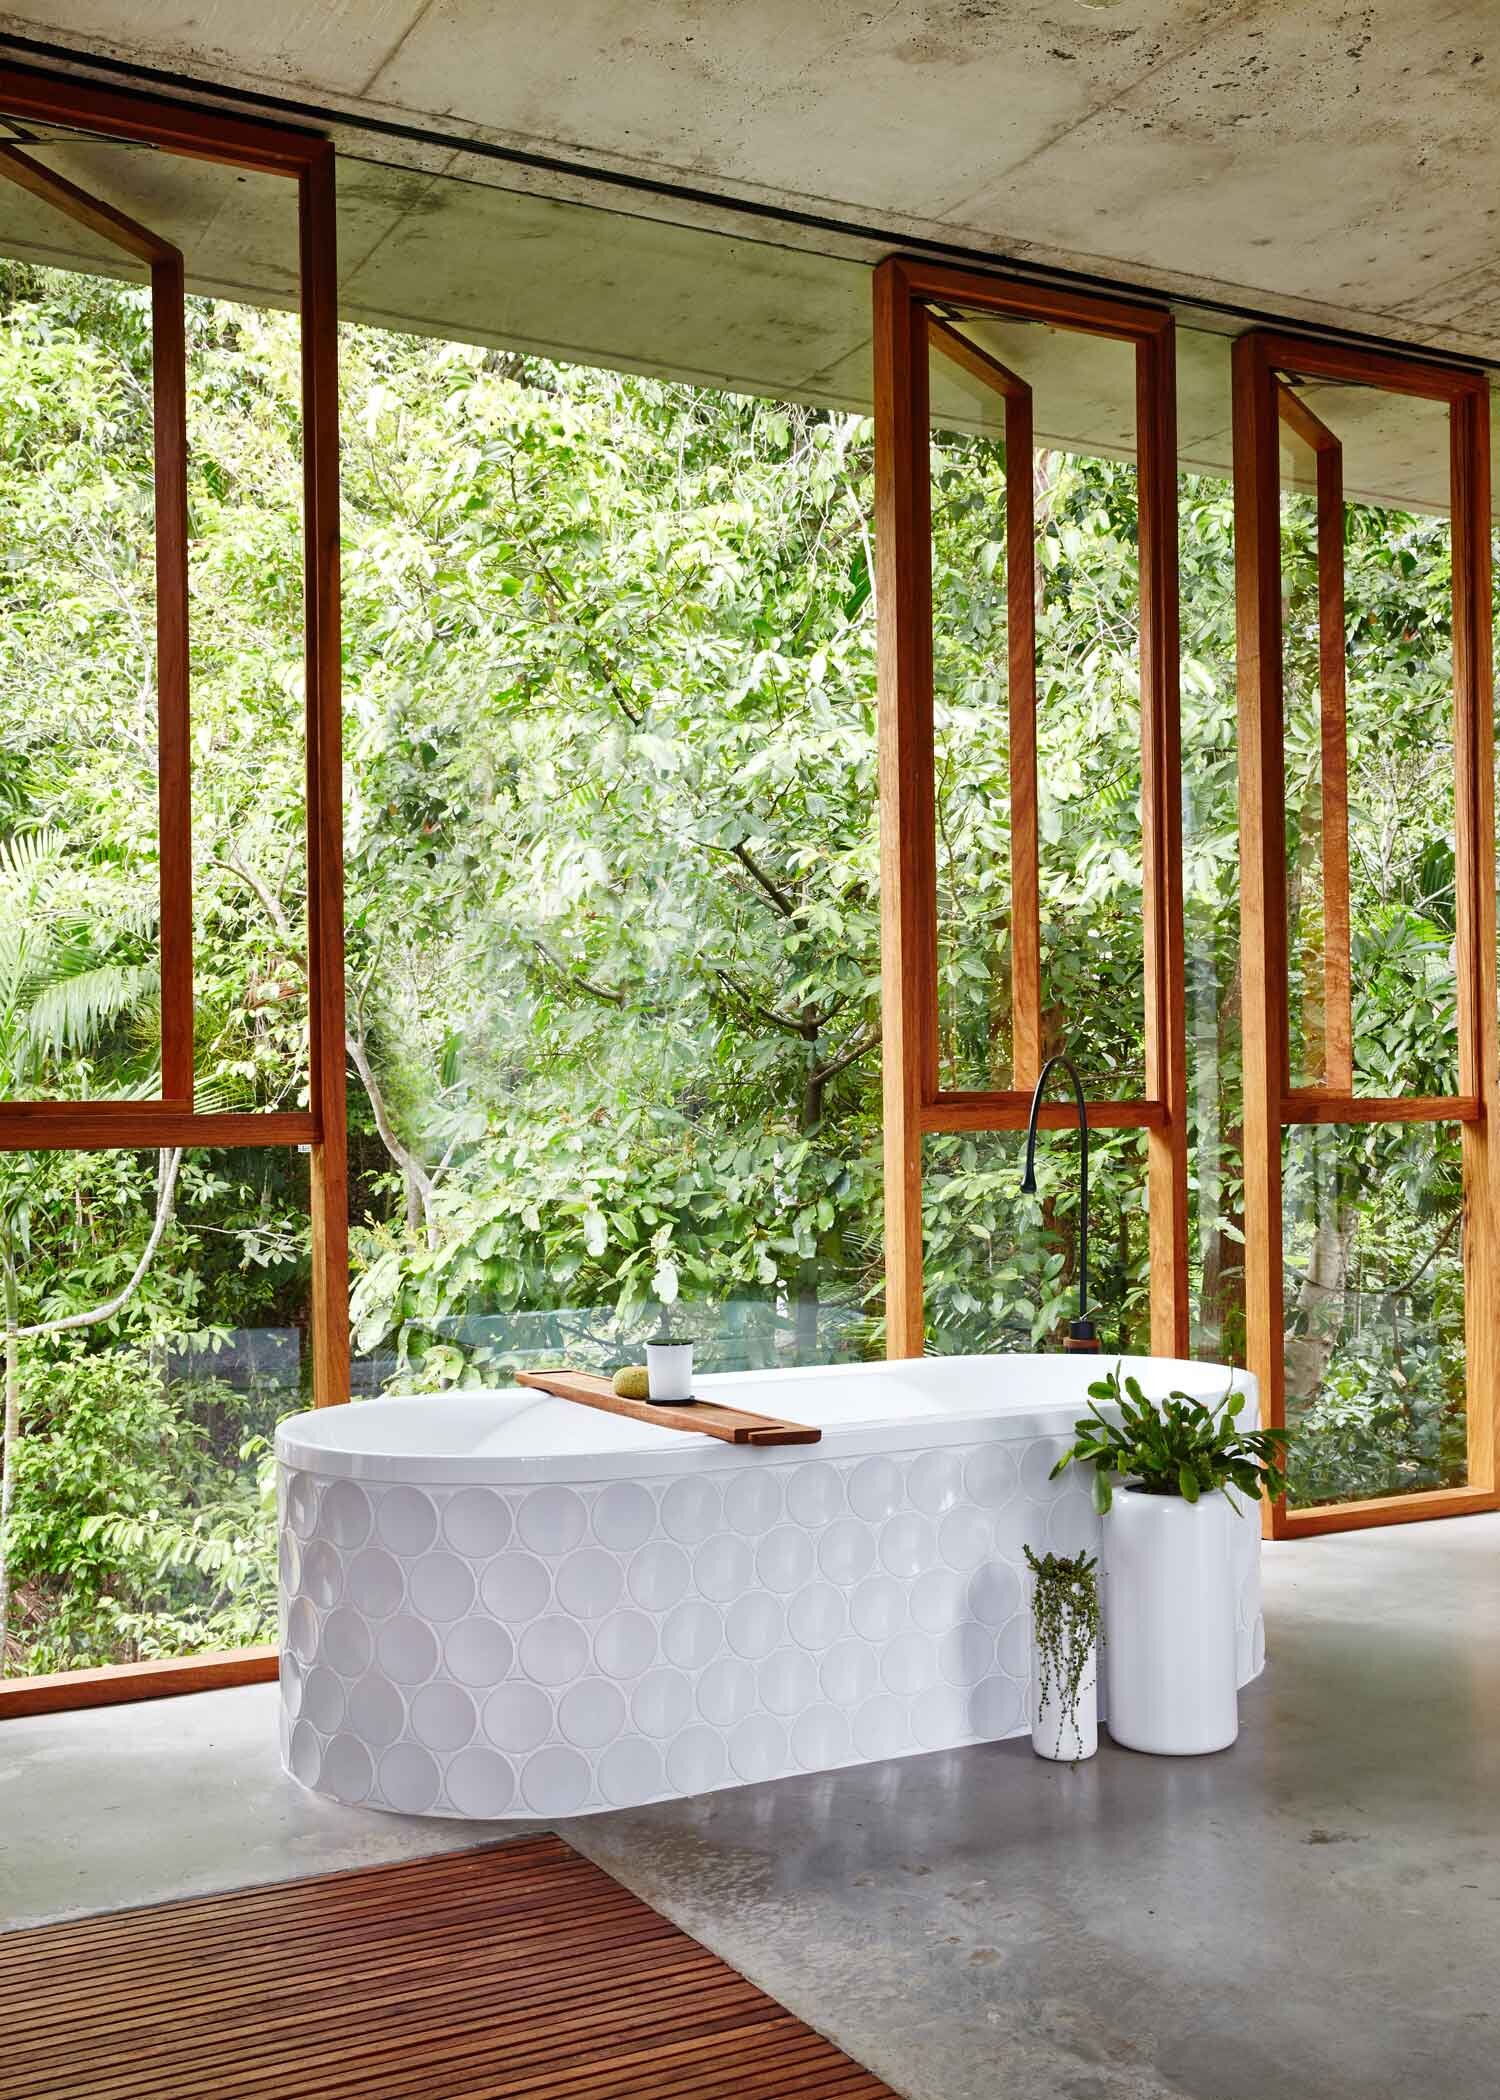 Planchonella House by Jesse Bennett Architect. Photography by Sean Fennessy | Yellowtrace